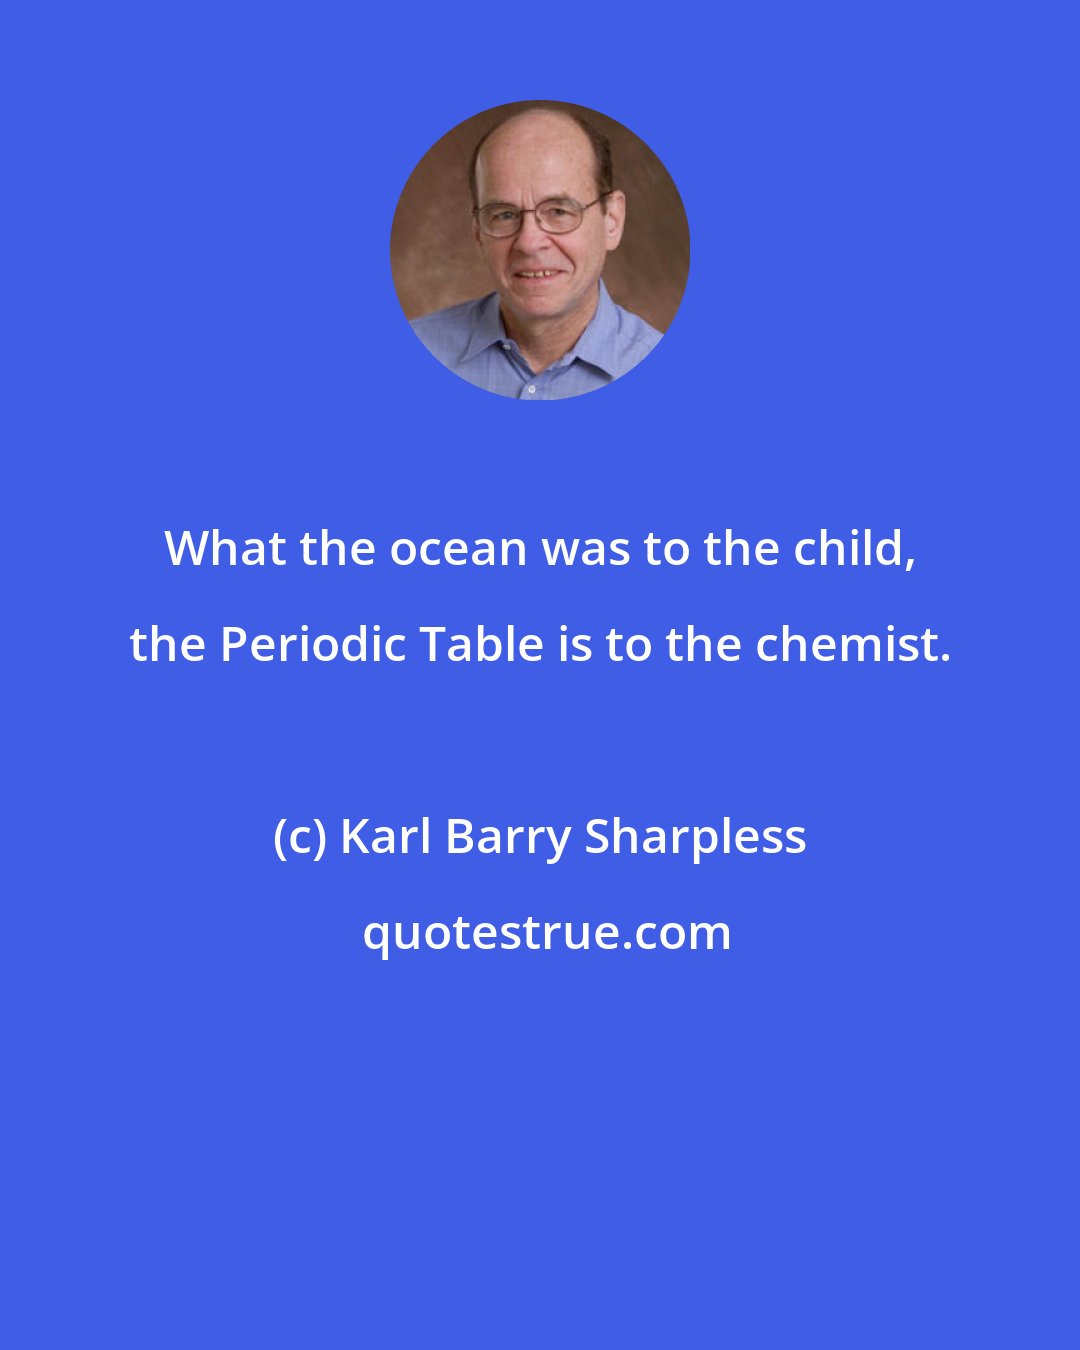 Karl Barry Sharpless: What the ocean was to the child, the Periodic Table is to the chemist.